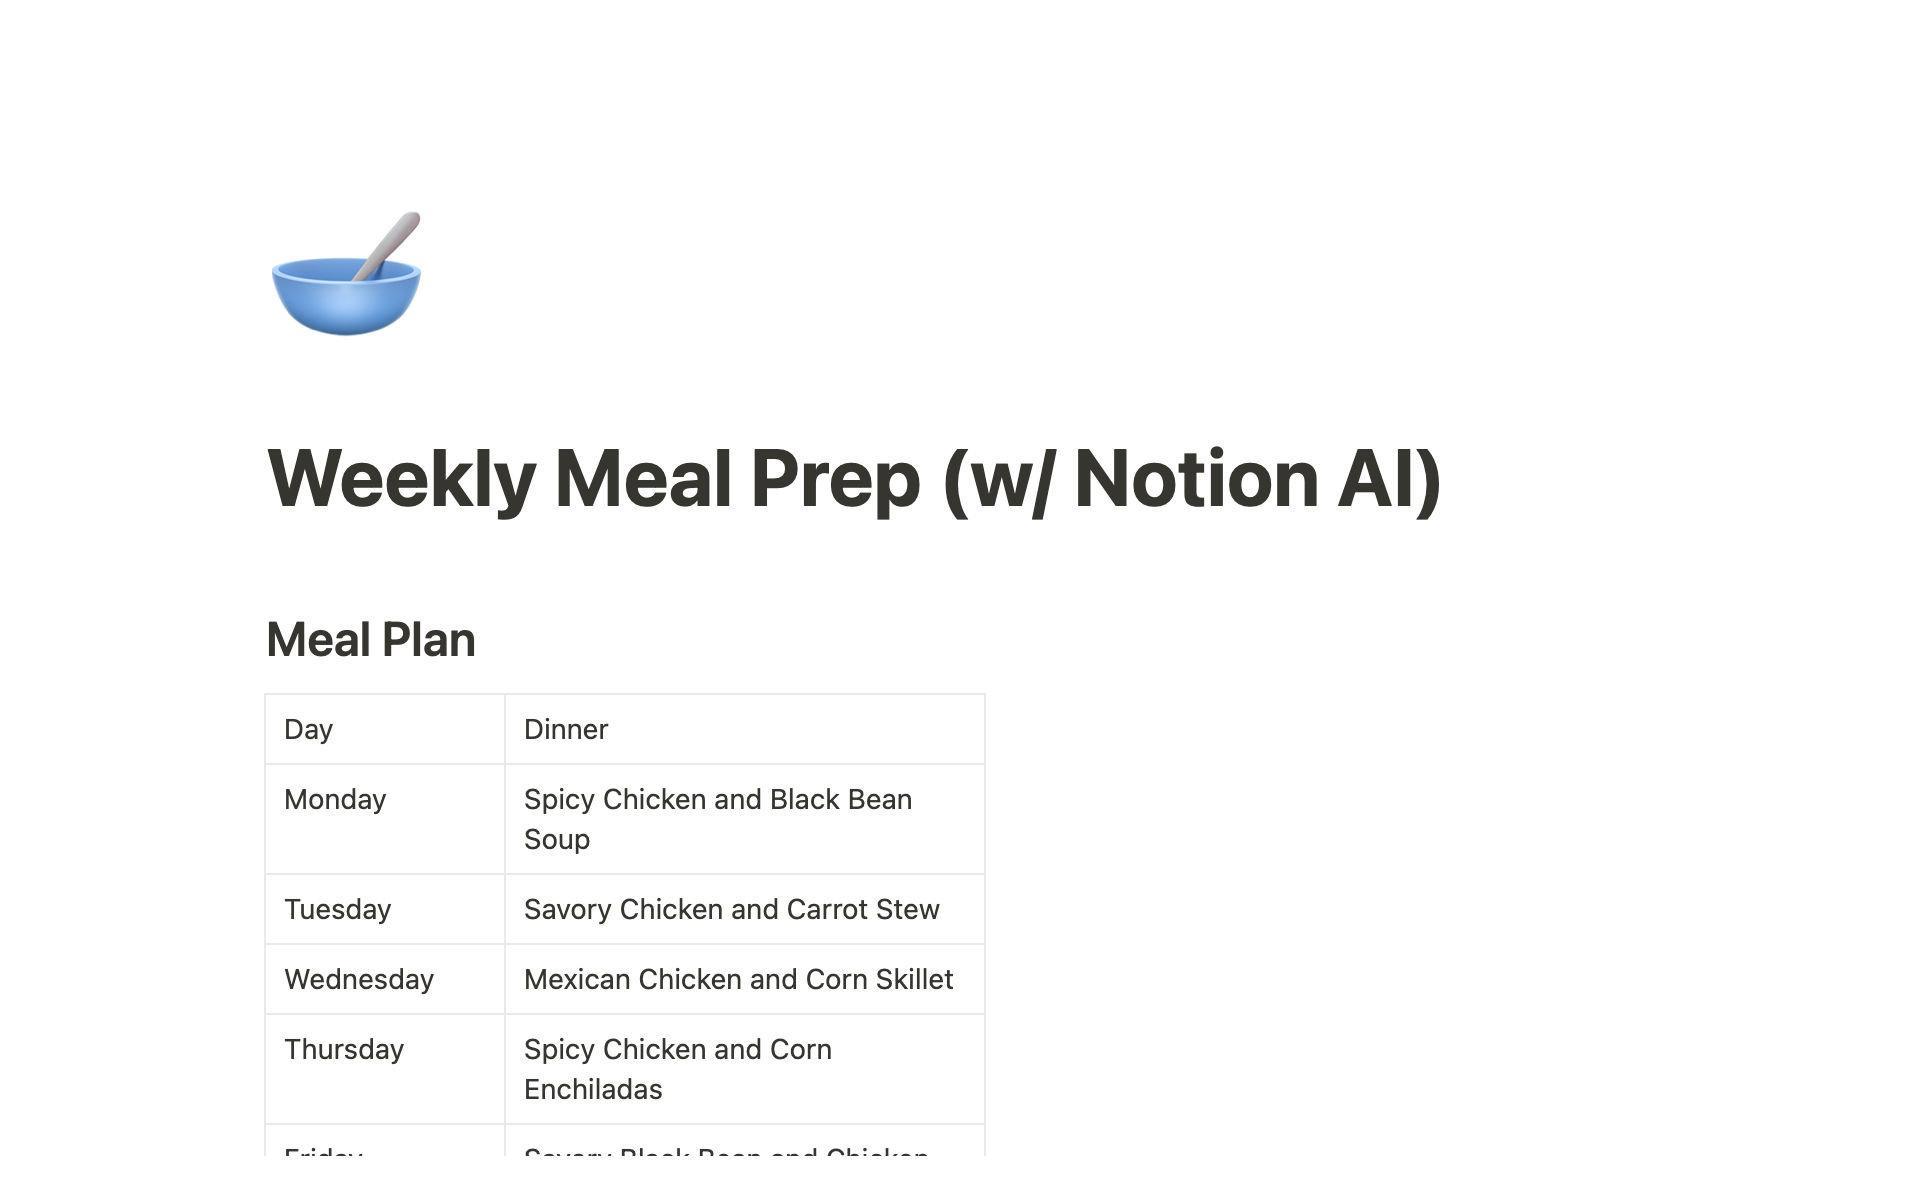 Planning meals for the week can be really challenging process. Let AI spice up your diet!